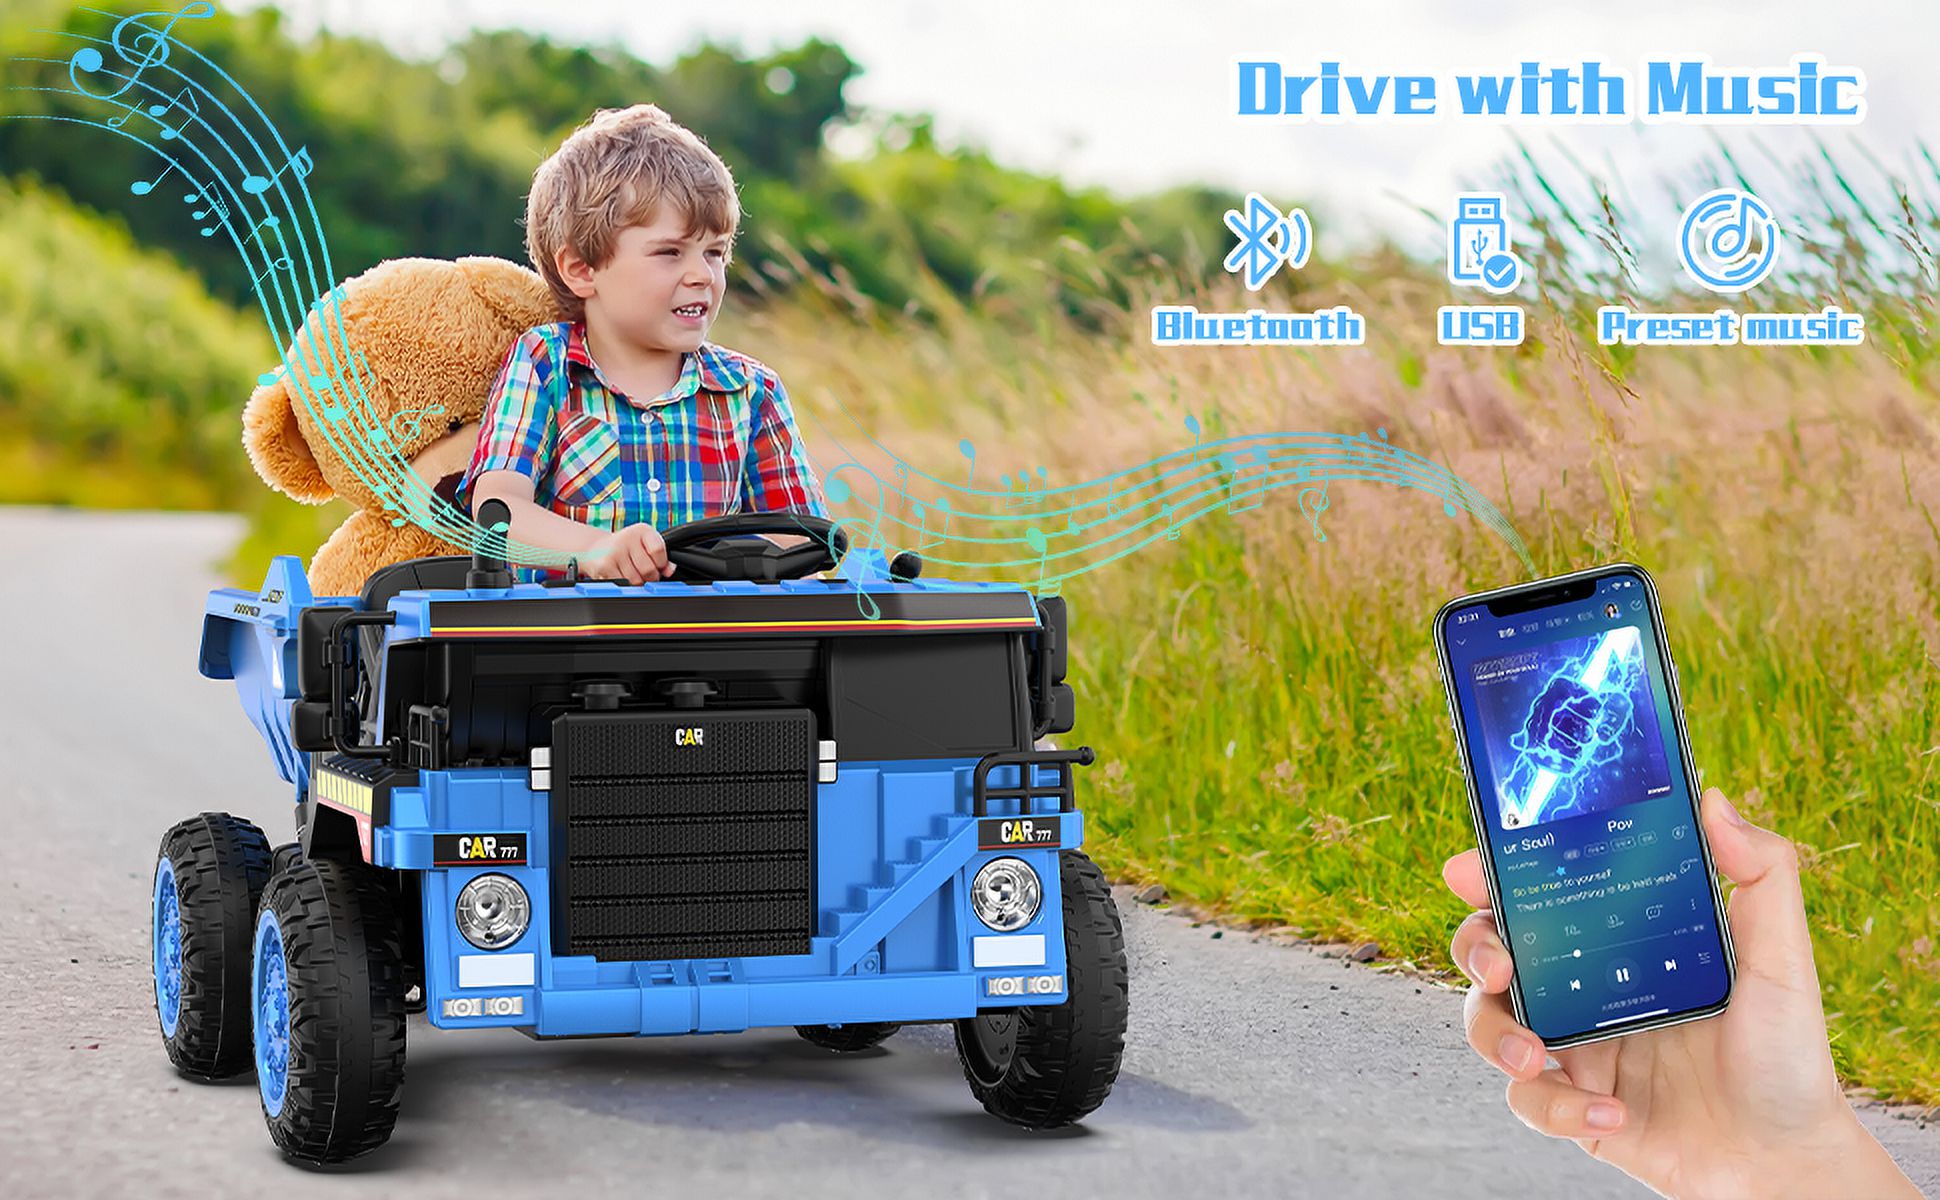 TOKTOO 12V Powered Ride on Dump Truck, Kid Electric Car with Remote Control, Music Player, Electric Dump Bed-Blue - image 5 of 13